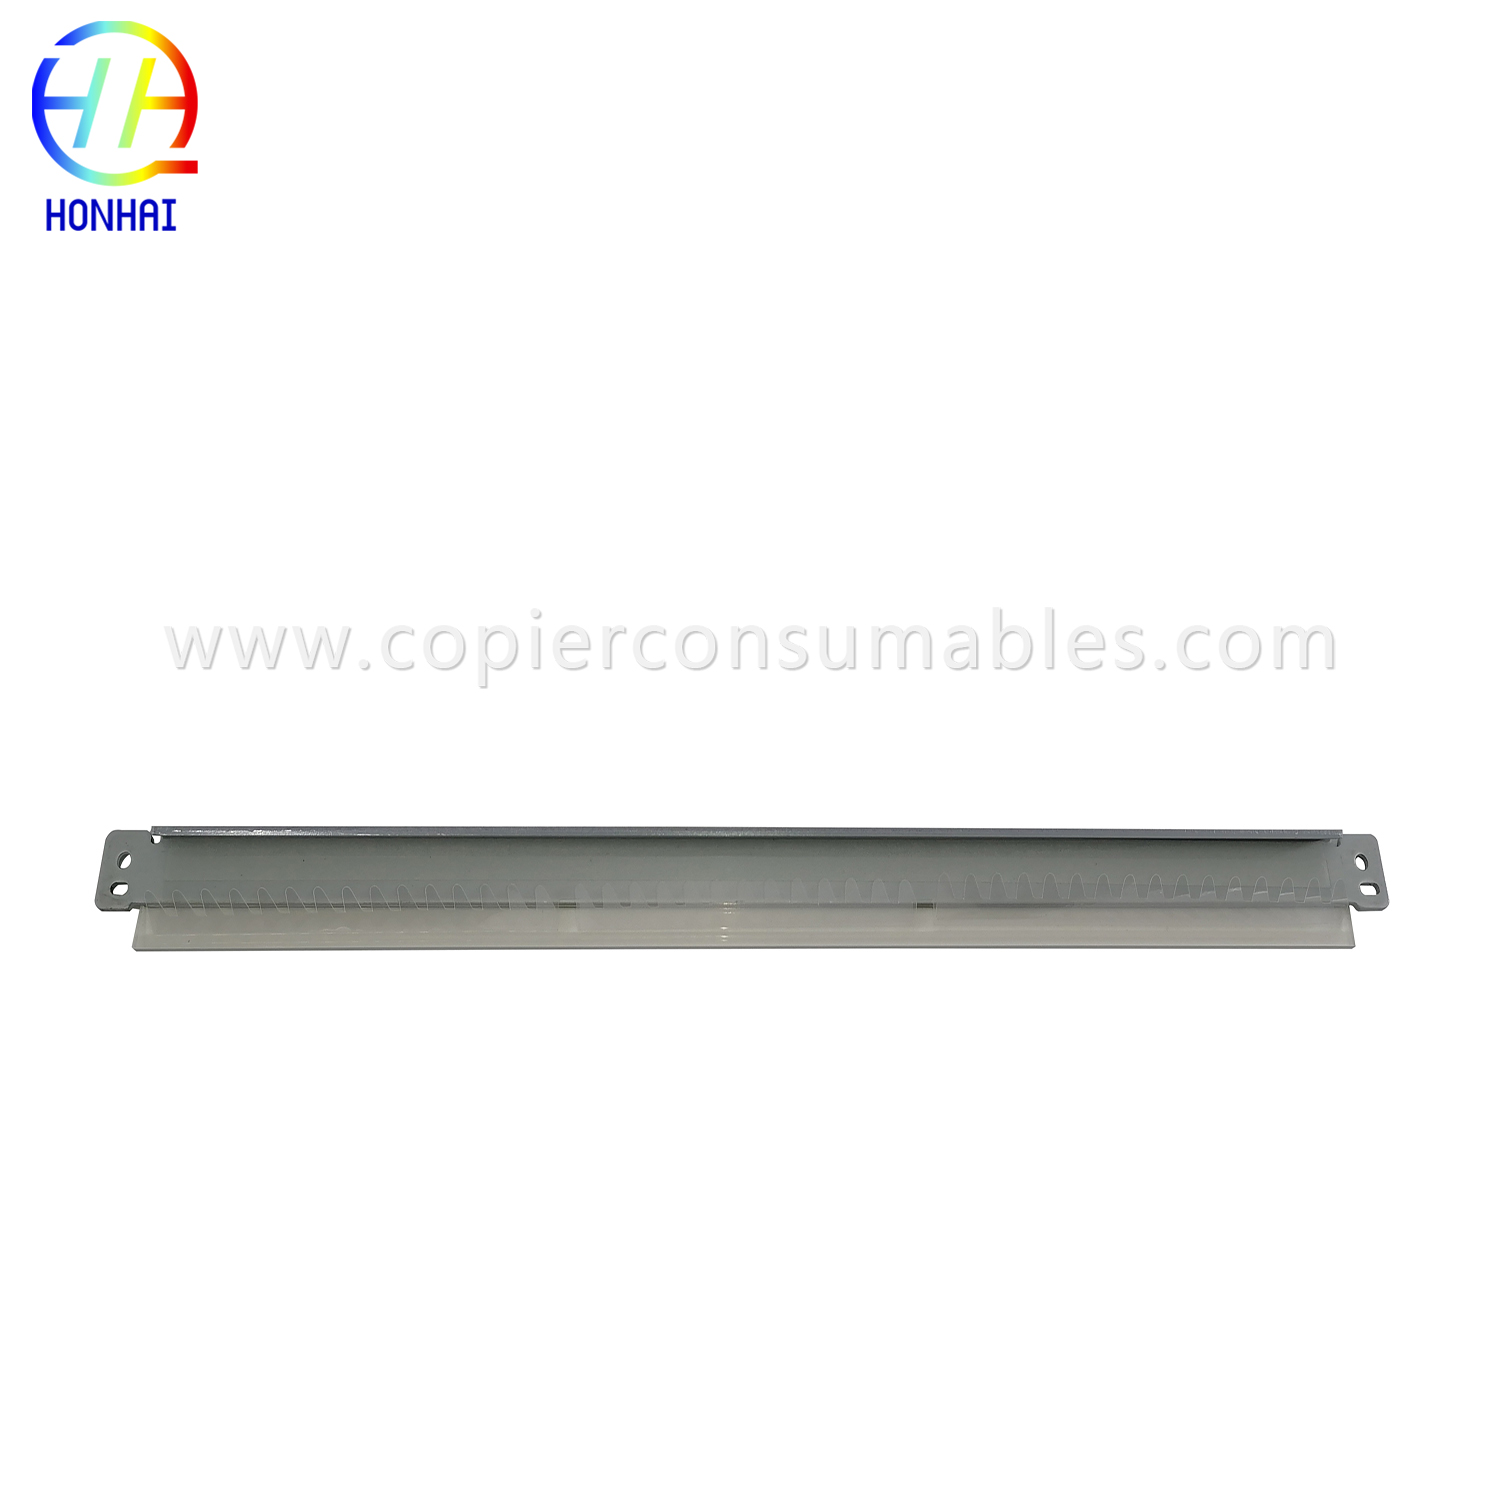 Drum Cleaning Blade for Xerox 3300 3375 2200 2270 3370 5570 7425 7435